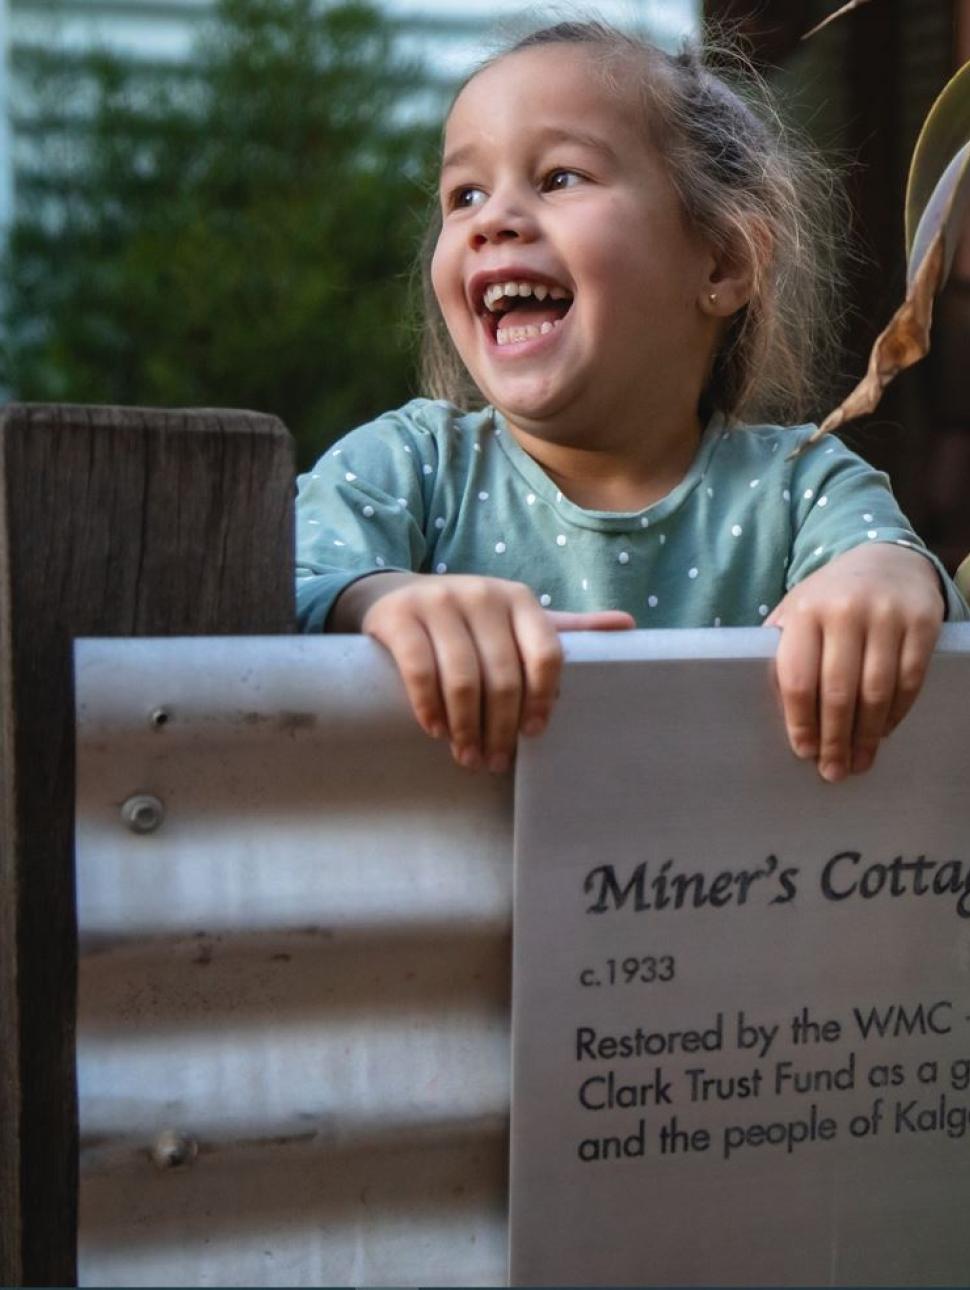 Child holding onto a metal dence laughing with a garden behind her